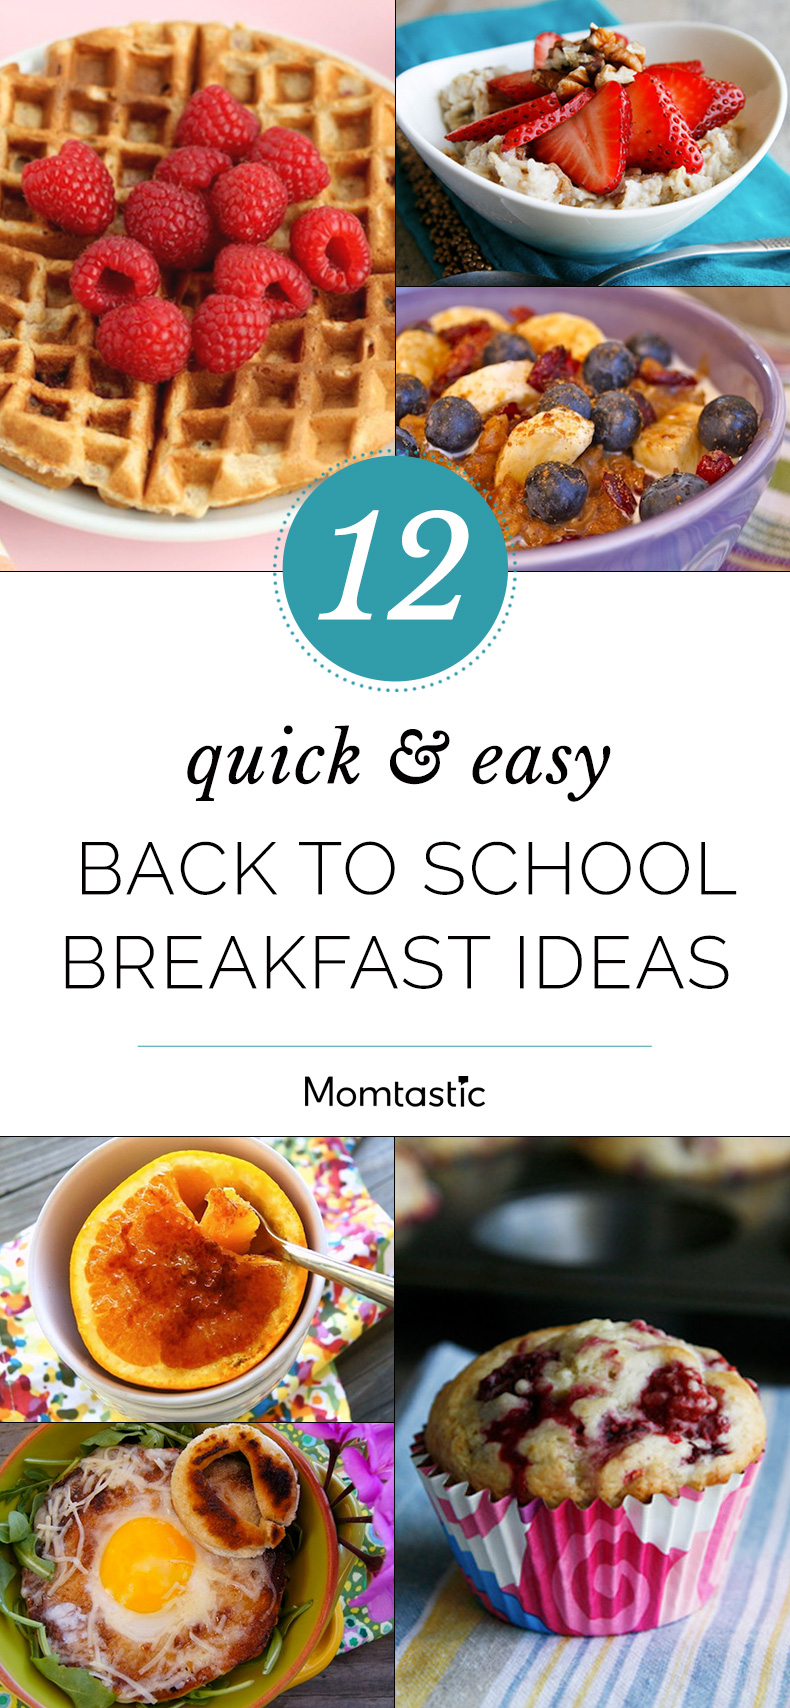 Quick And Easy Back To School Breakfast Ideas